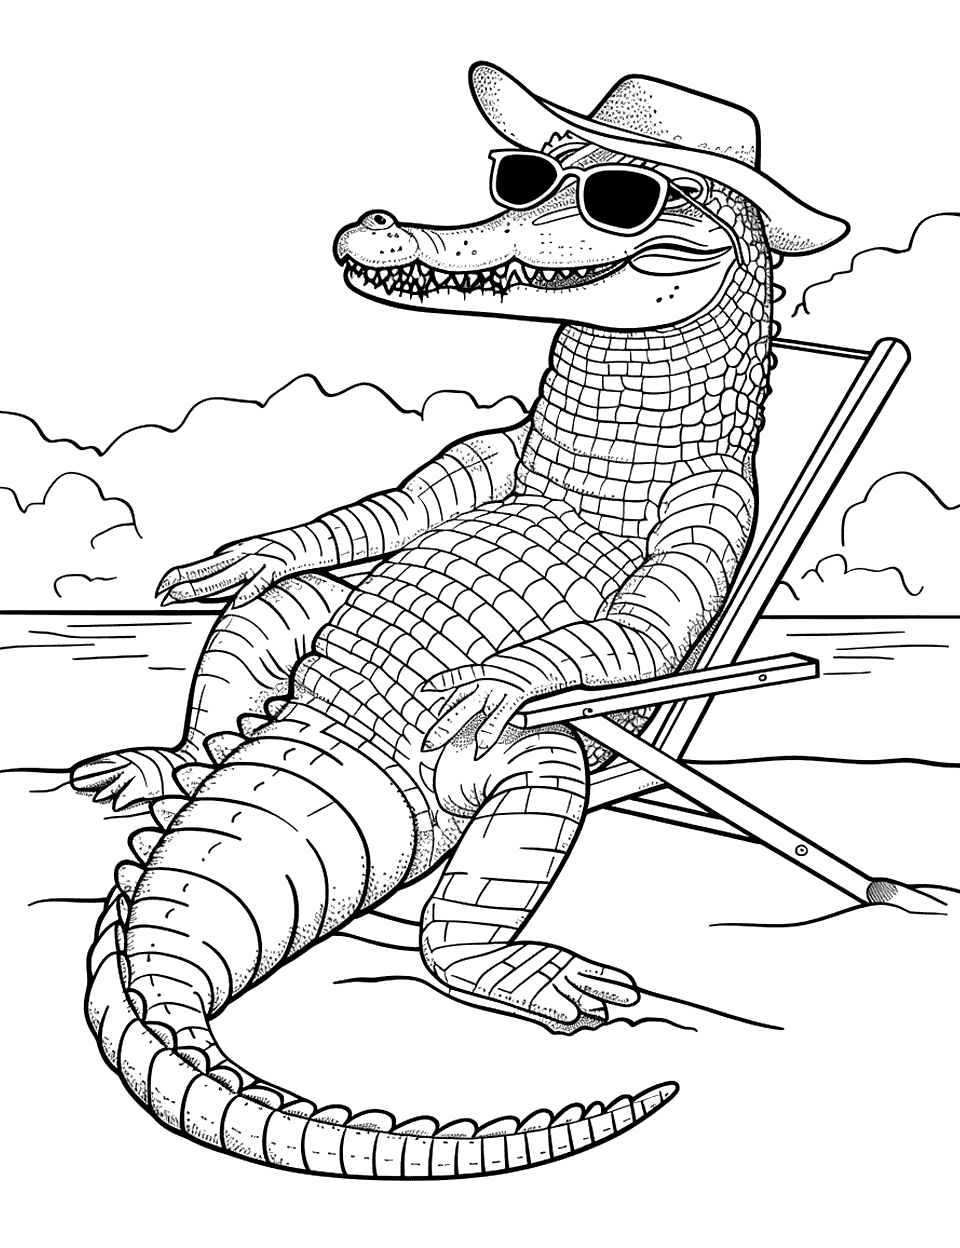 Crocodile Wearing Sunglasses Coloring Page - A cool crocodile lounging on a beach chair, wearing sunglasses and a sunhat.